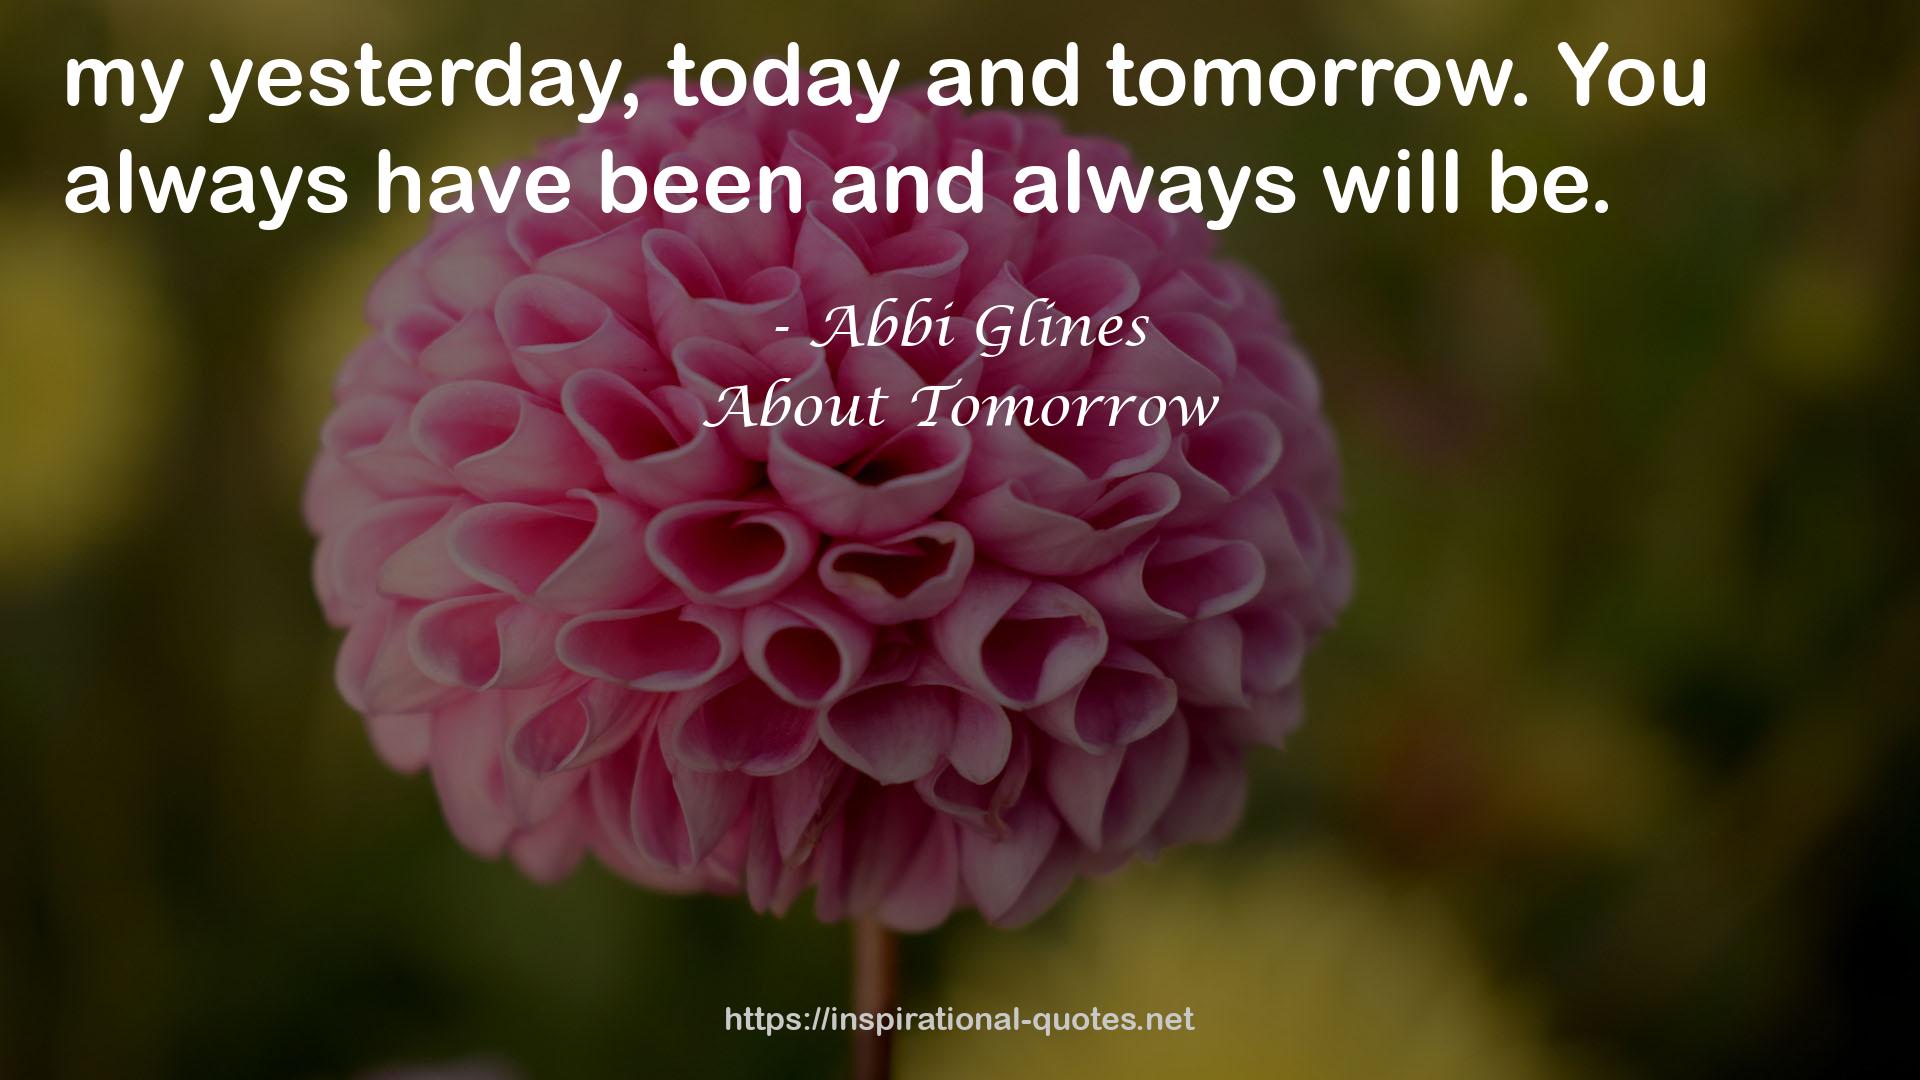 About Tomorrow QUOTES